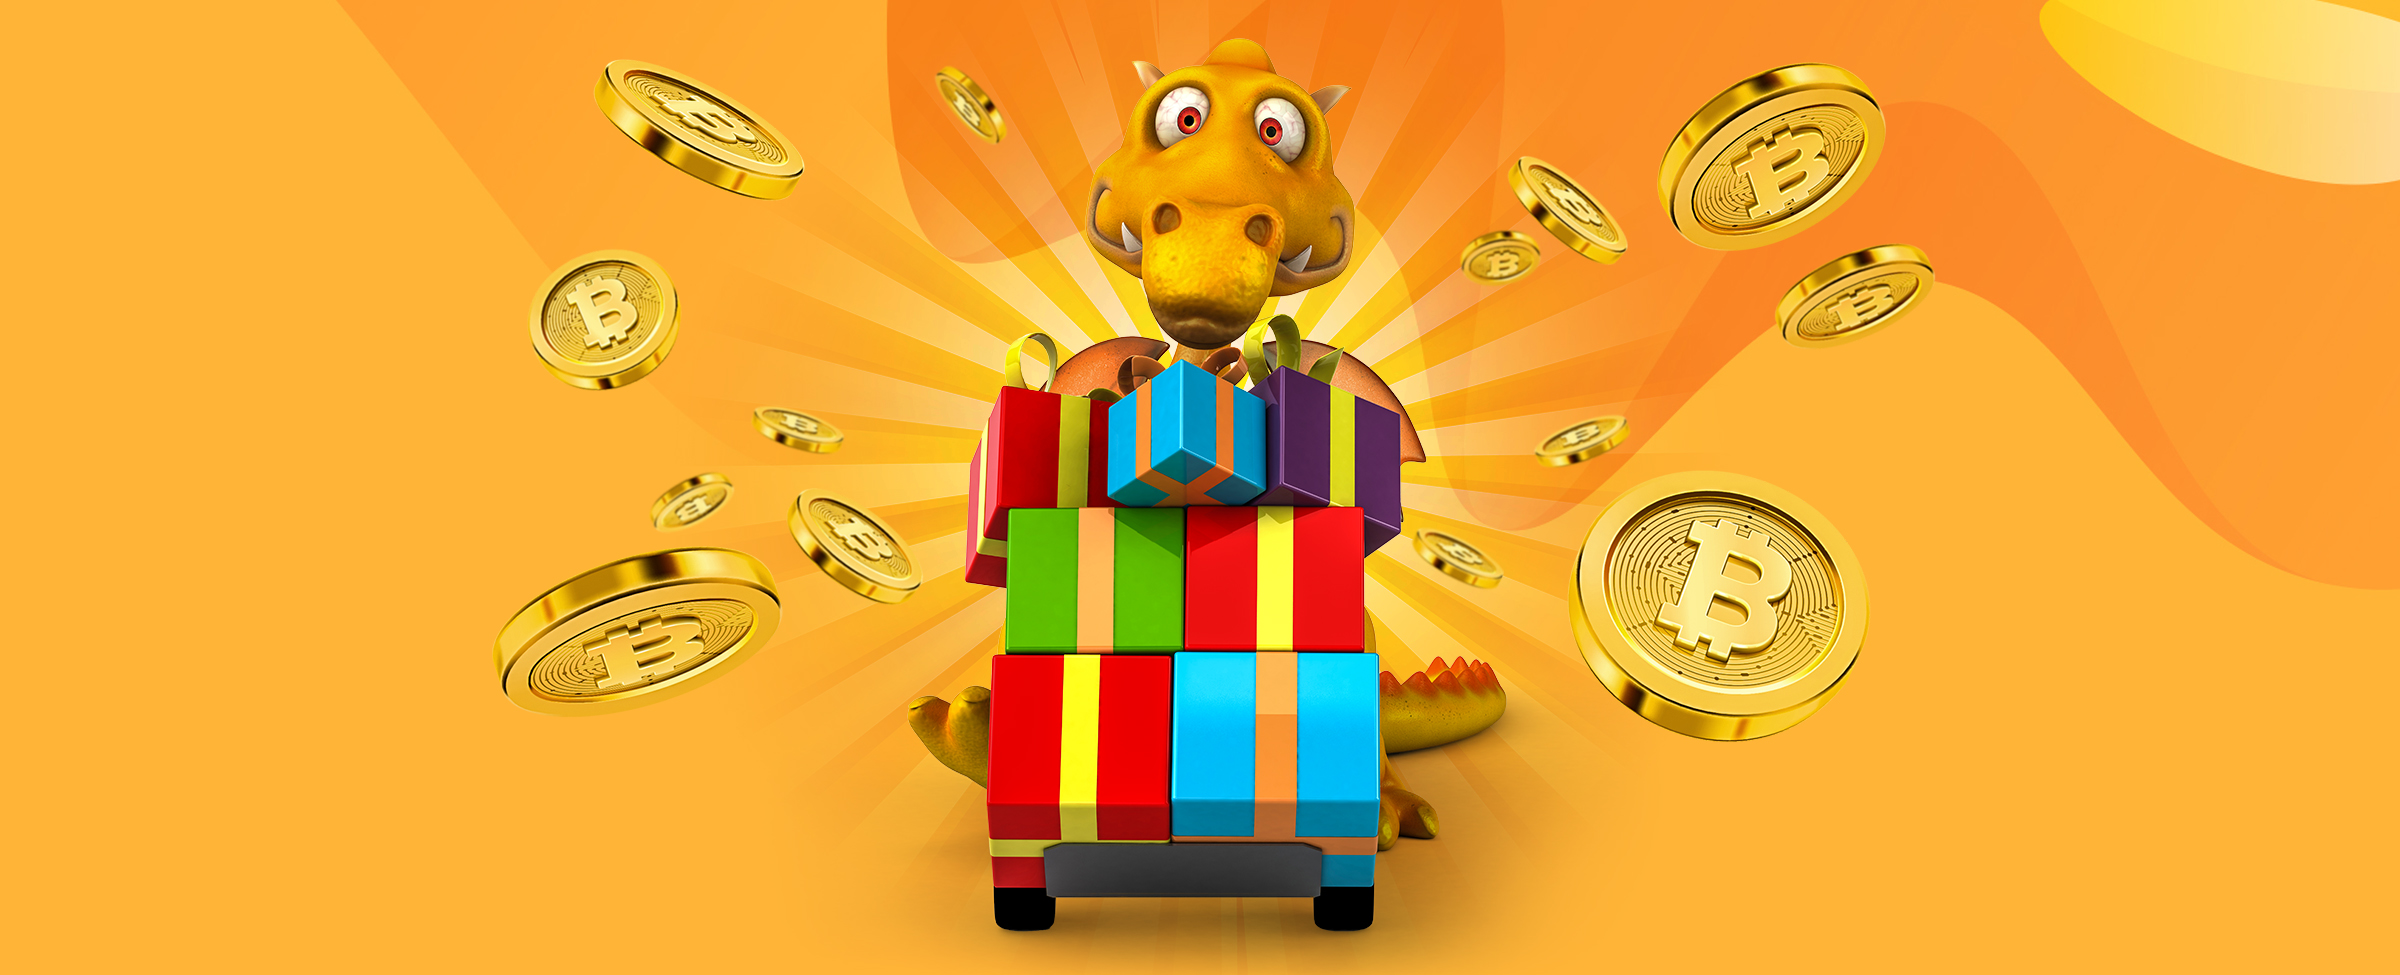 Can you play slots with crypto like Bitcoin? Well, look to see if you guessed right!